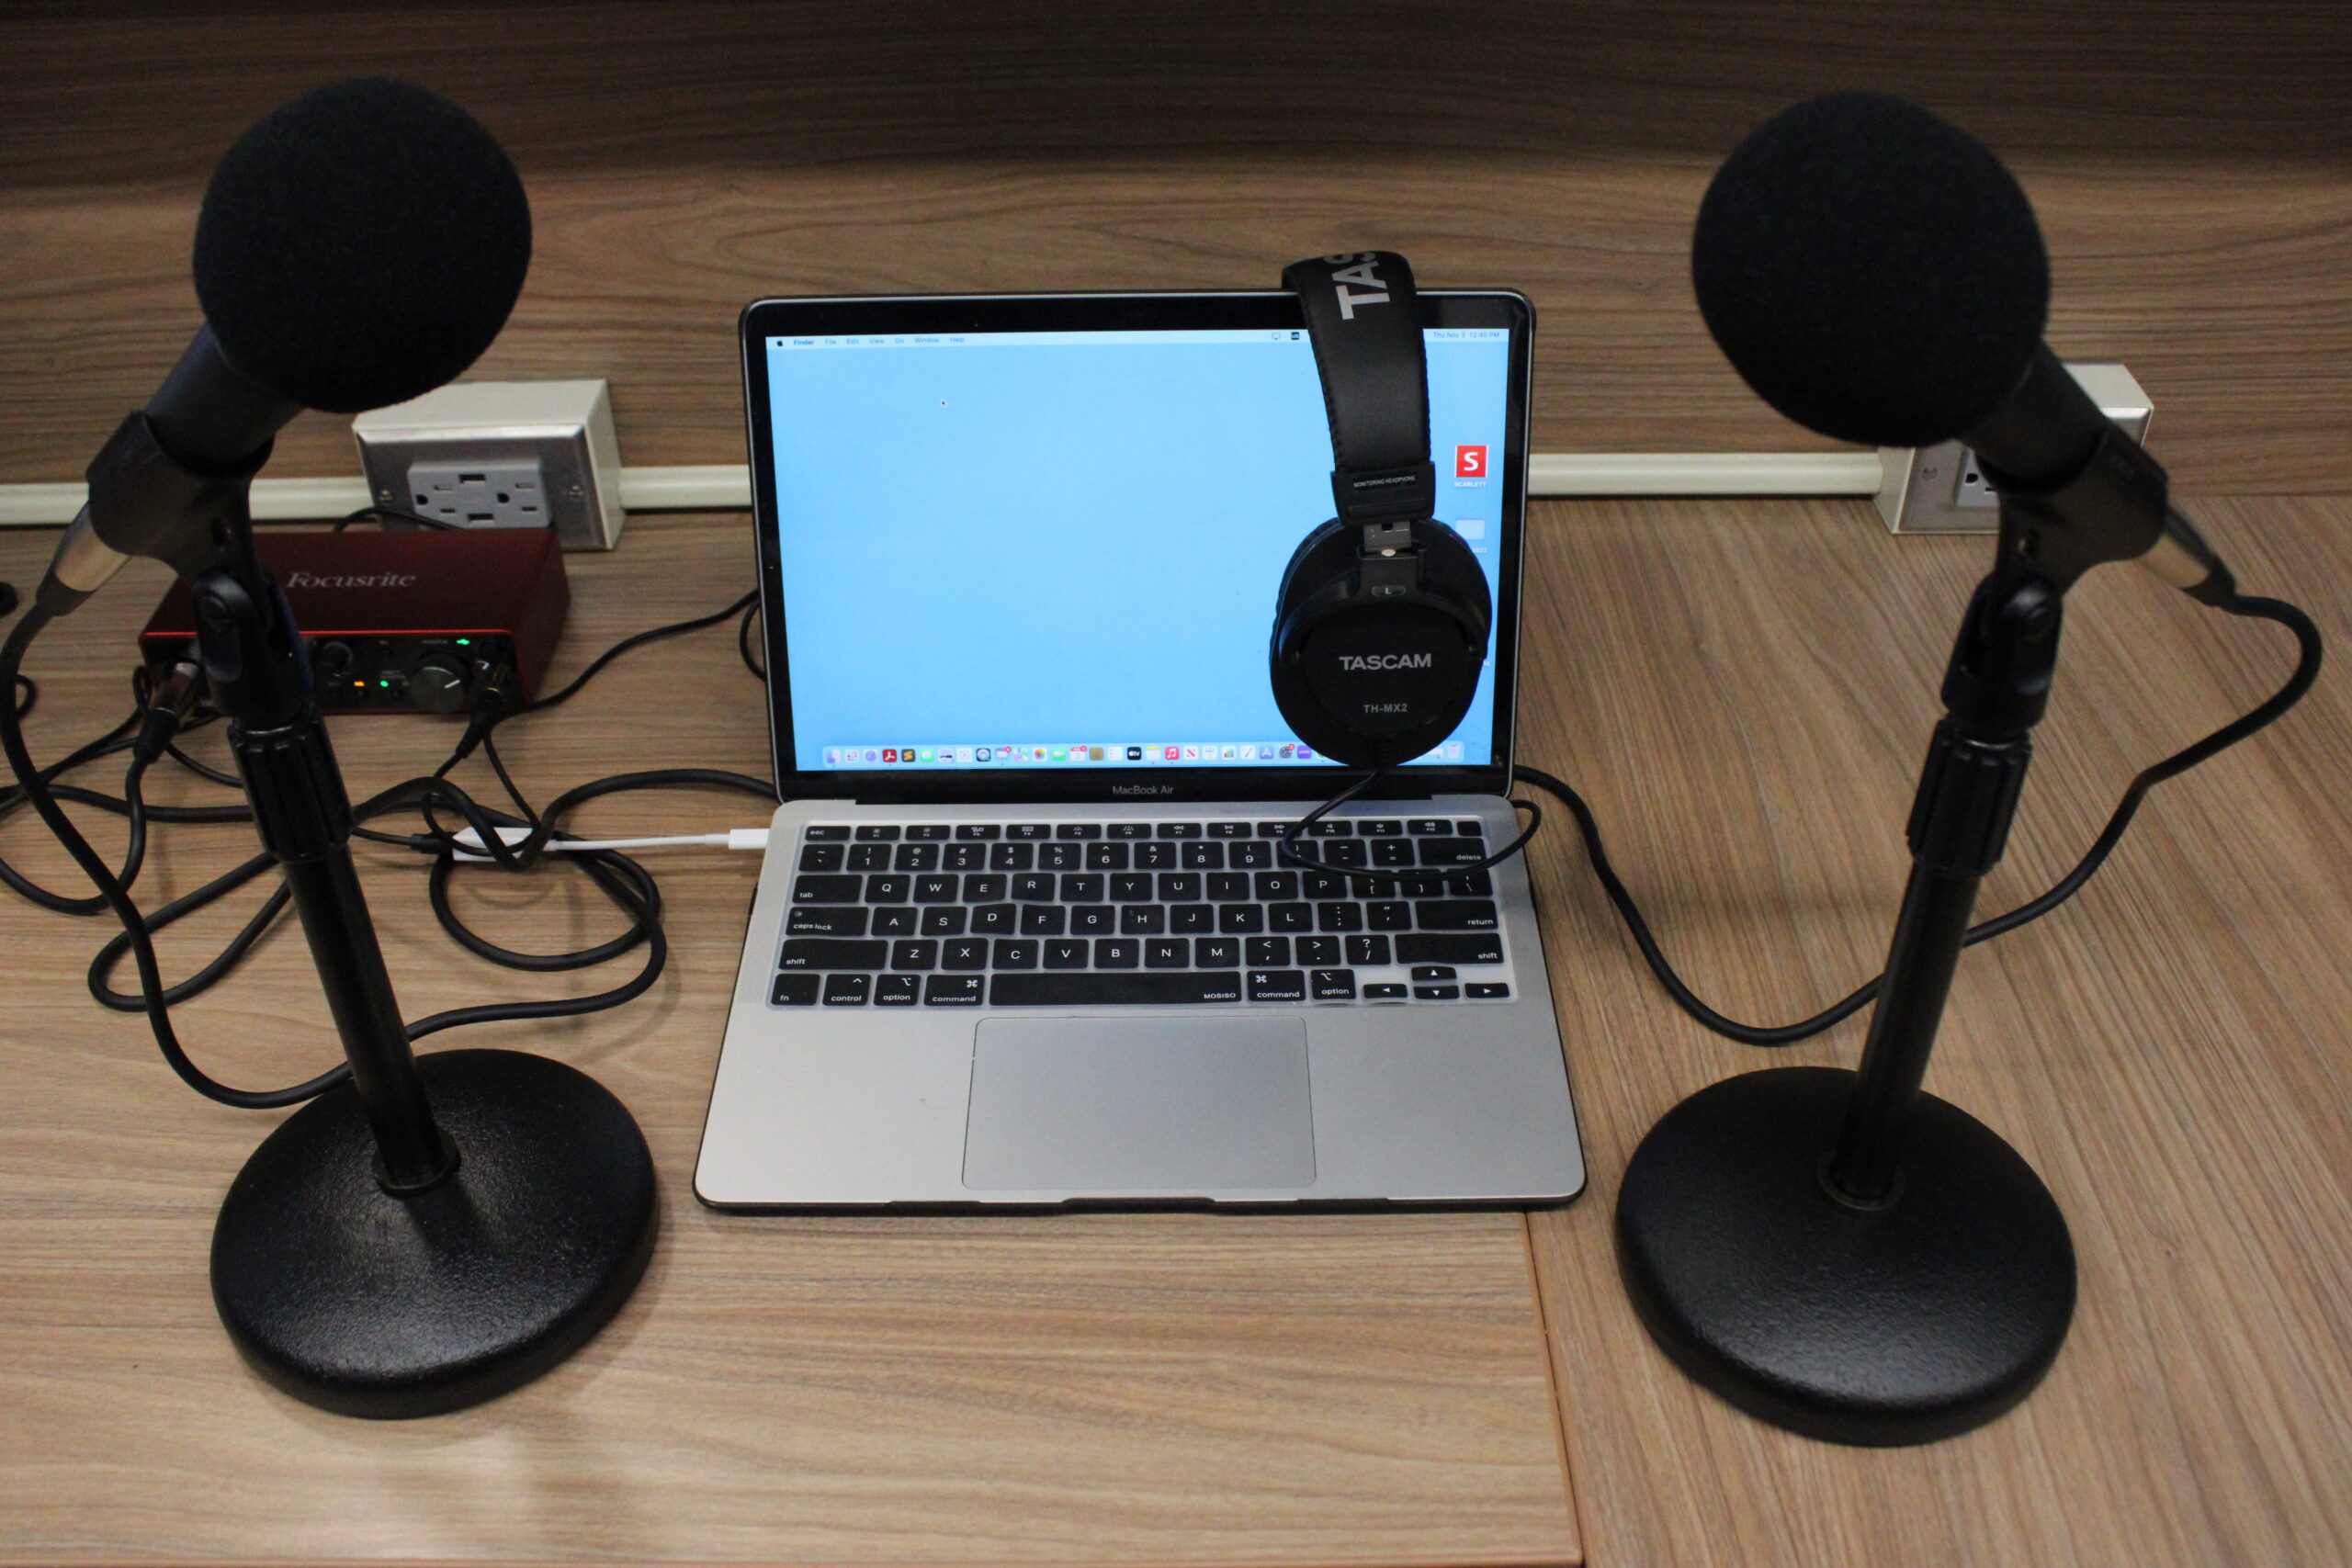 Podcast Microphone Setup: How to Set Up Your Mic and Recording Space